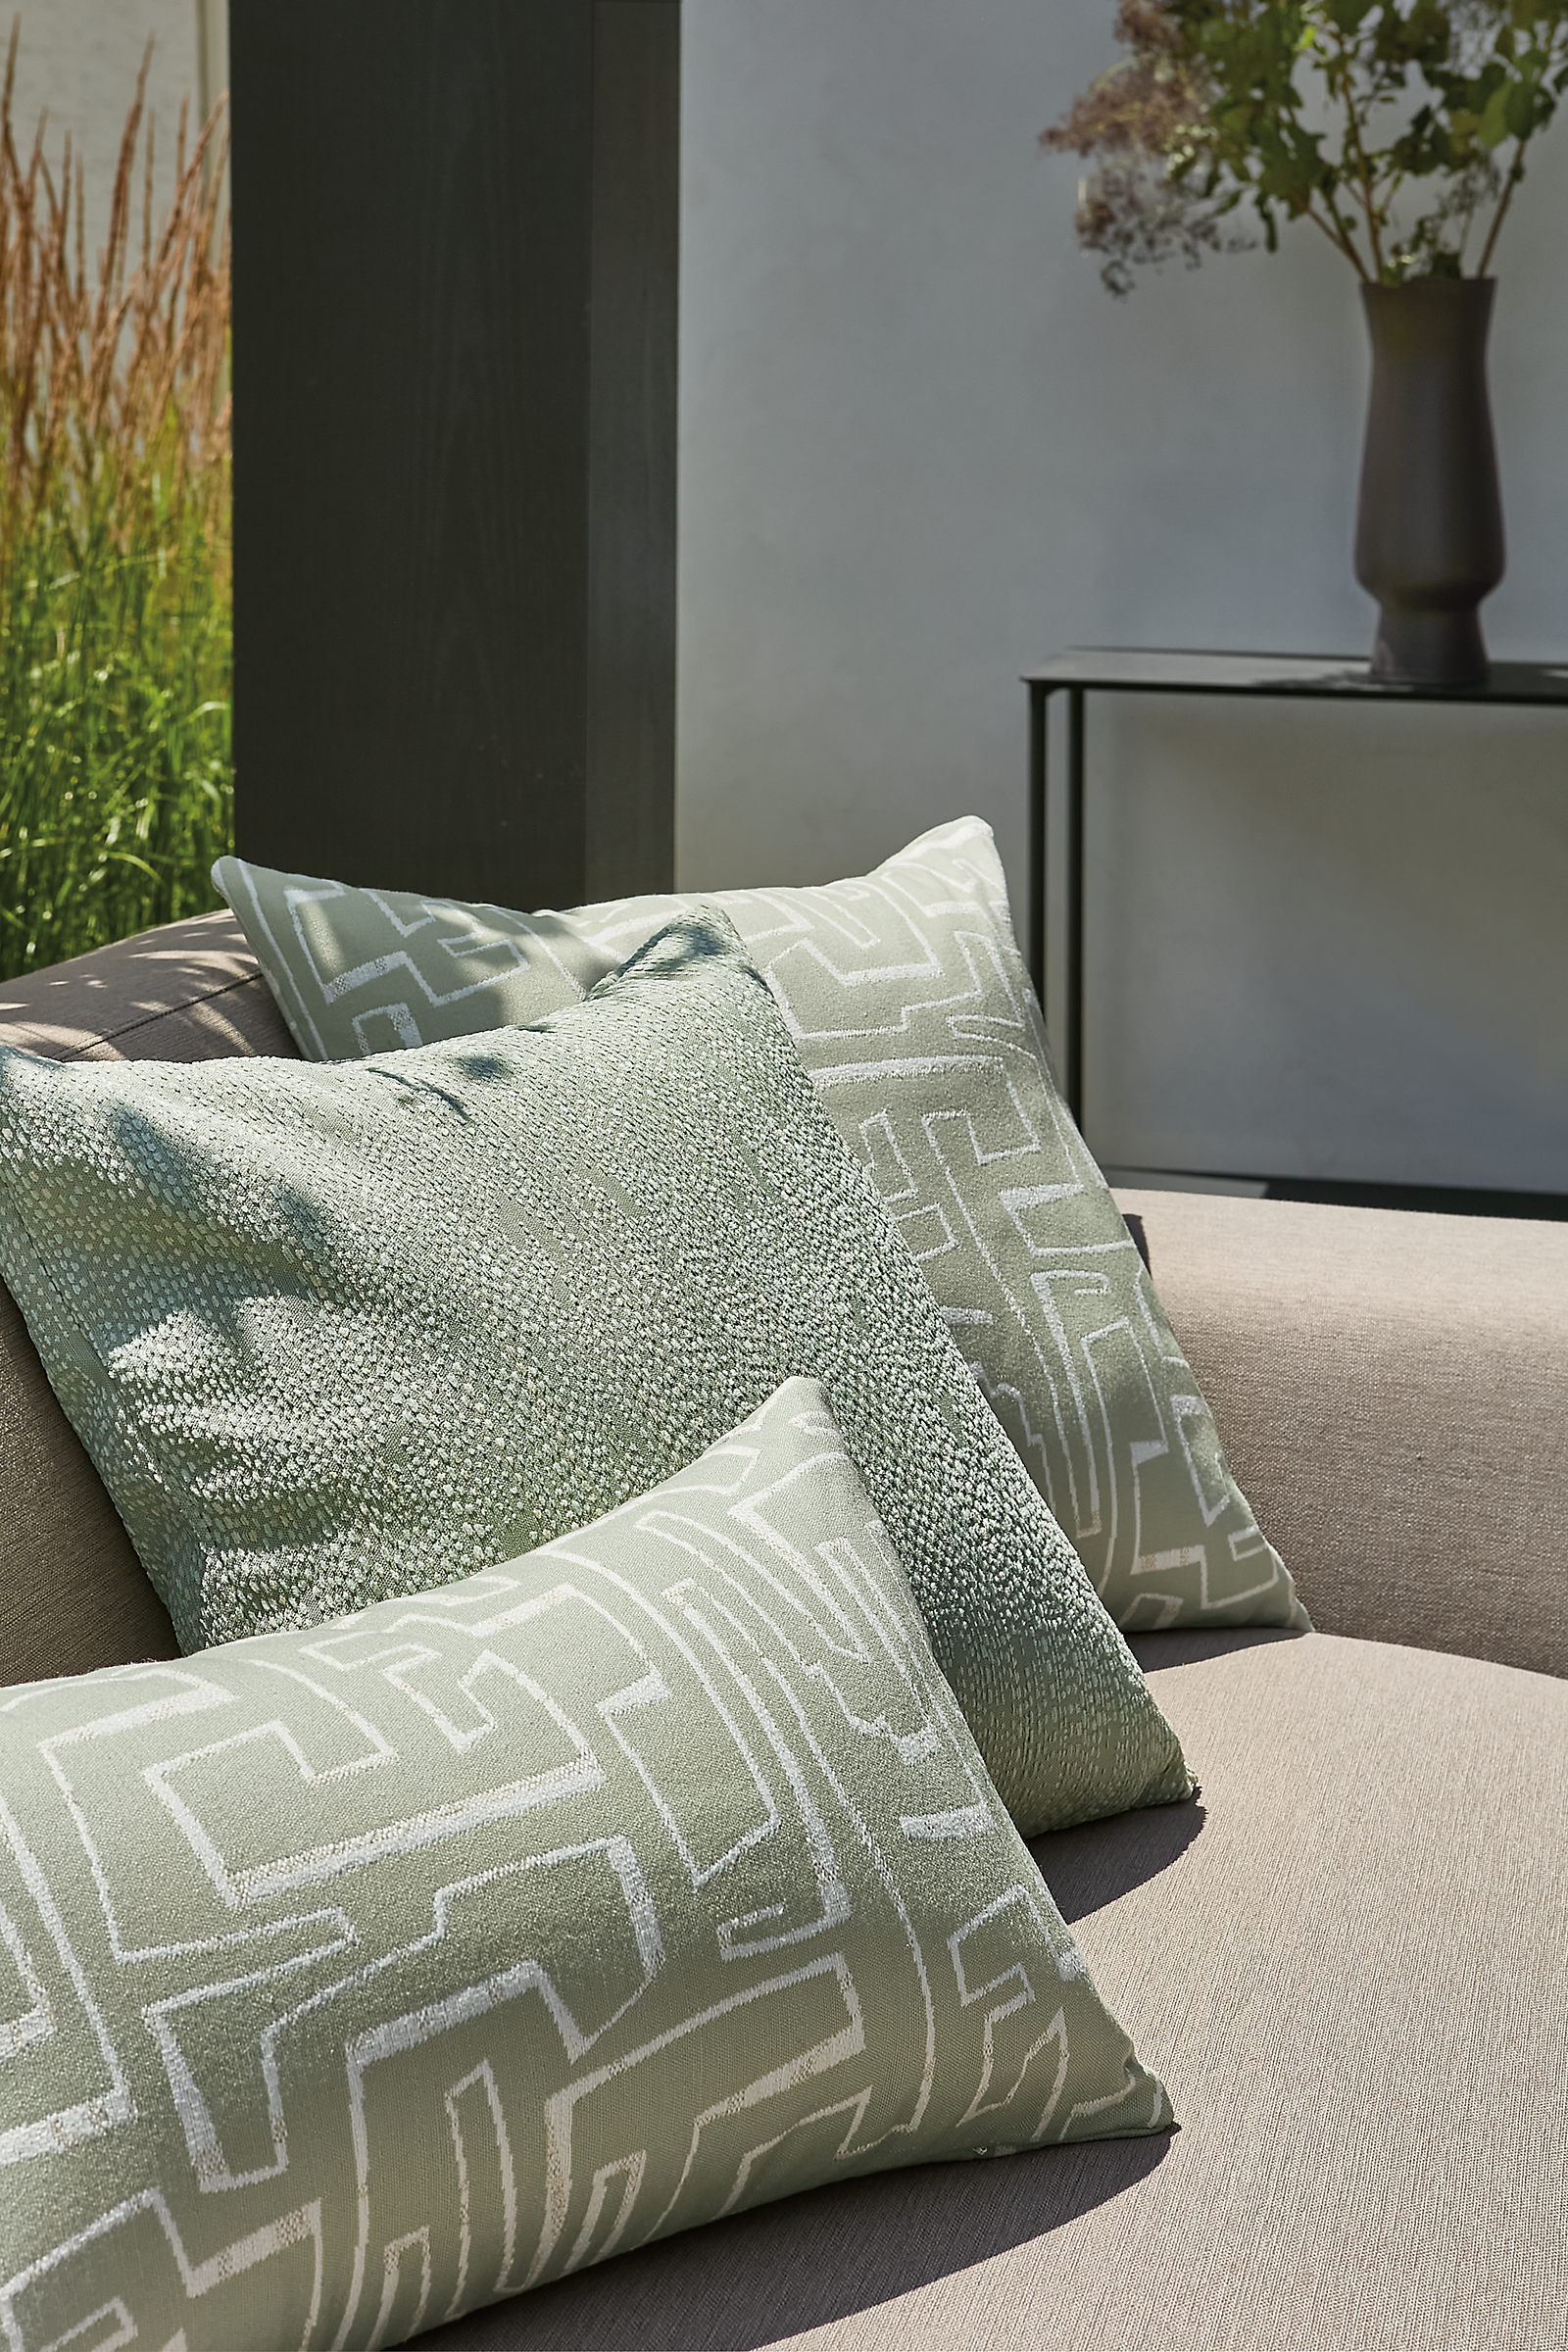 Outdoor space with several green outdoor pillows on drift sofa.